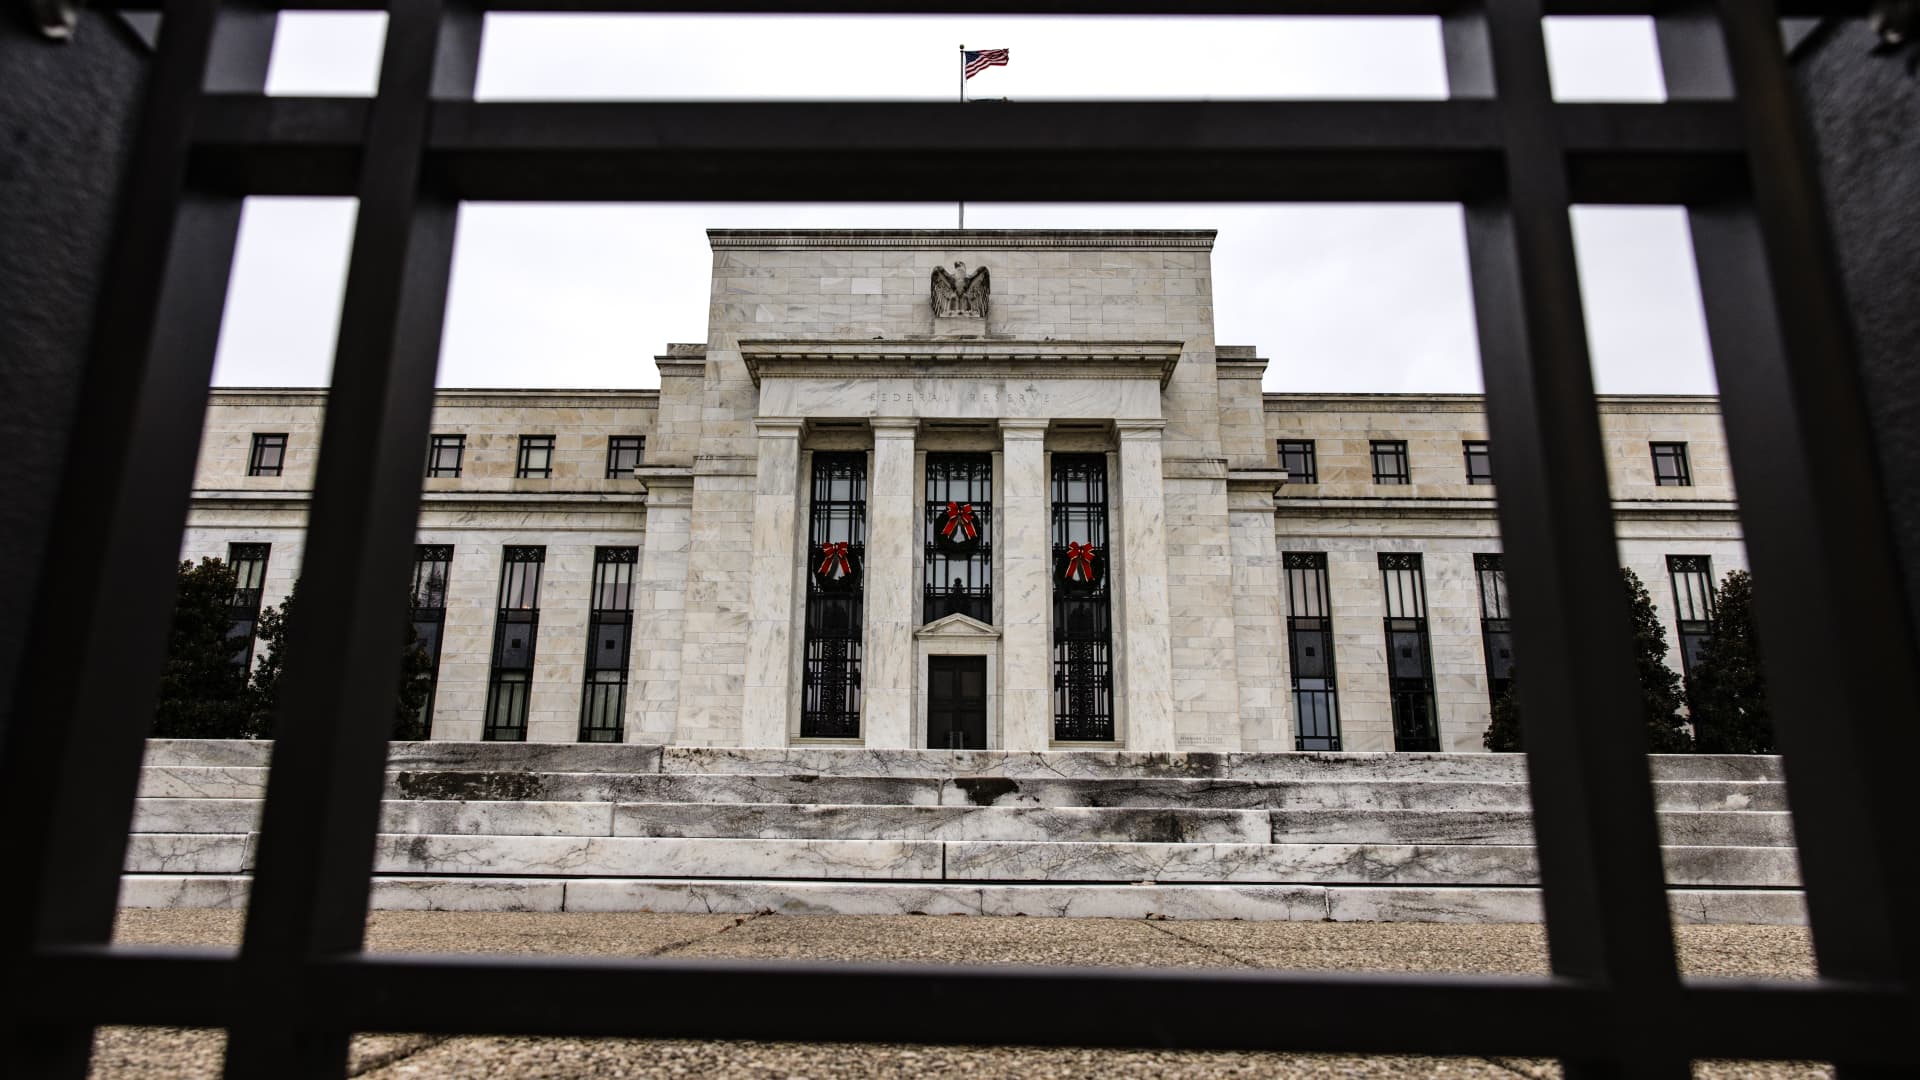 The Marriner S. Eccles Federal Reserve building in Washington, D.C., U.S., on Sunday, Dec. 19, 2021.